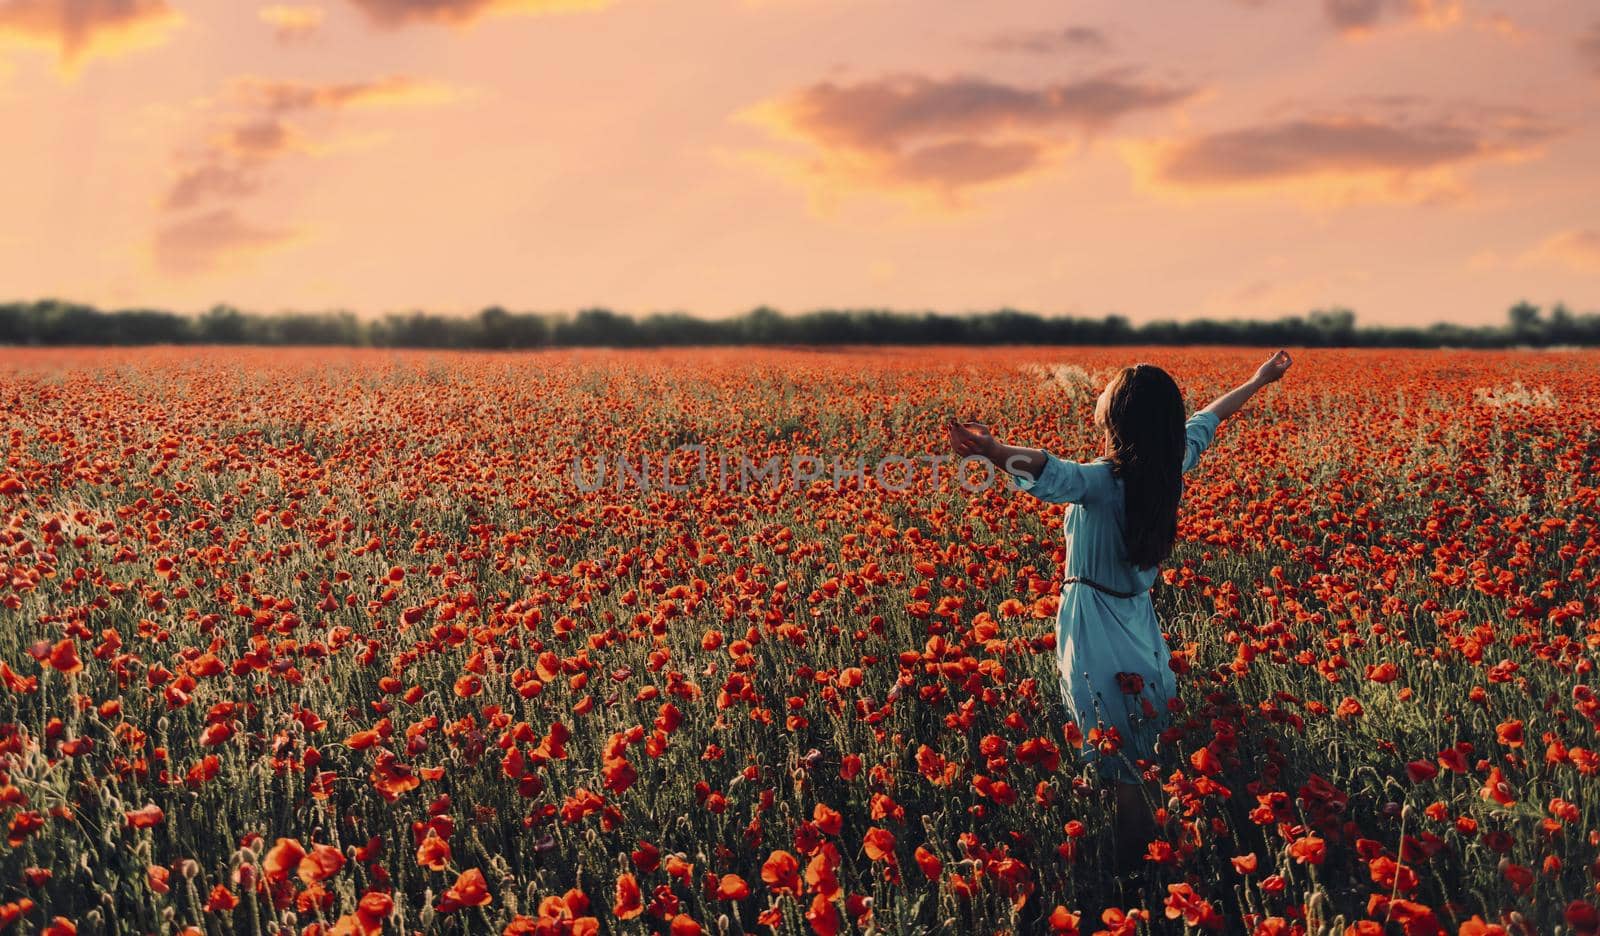 Brunette young woman with long hair relaxing with raised arms in poppy flower meadow at sunset in summer.